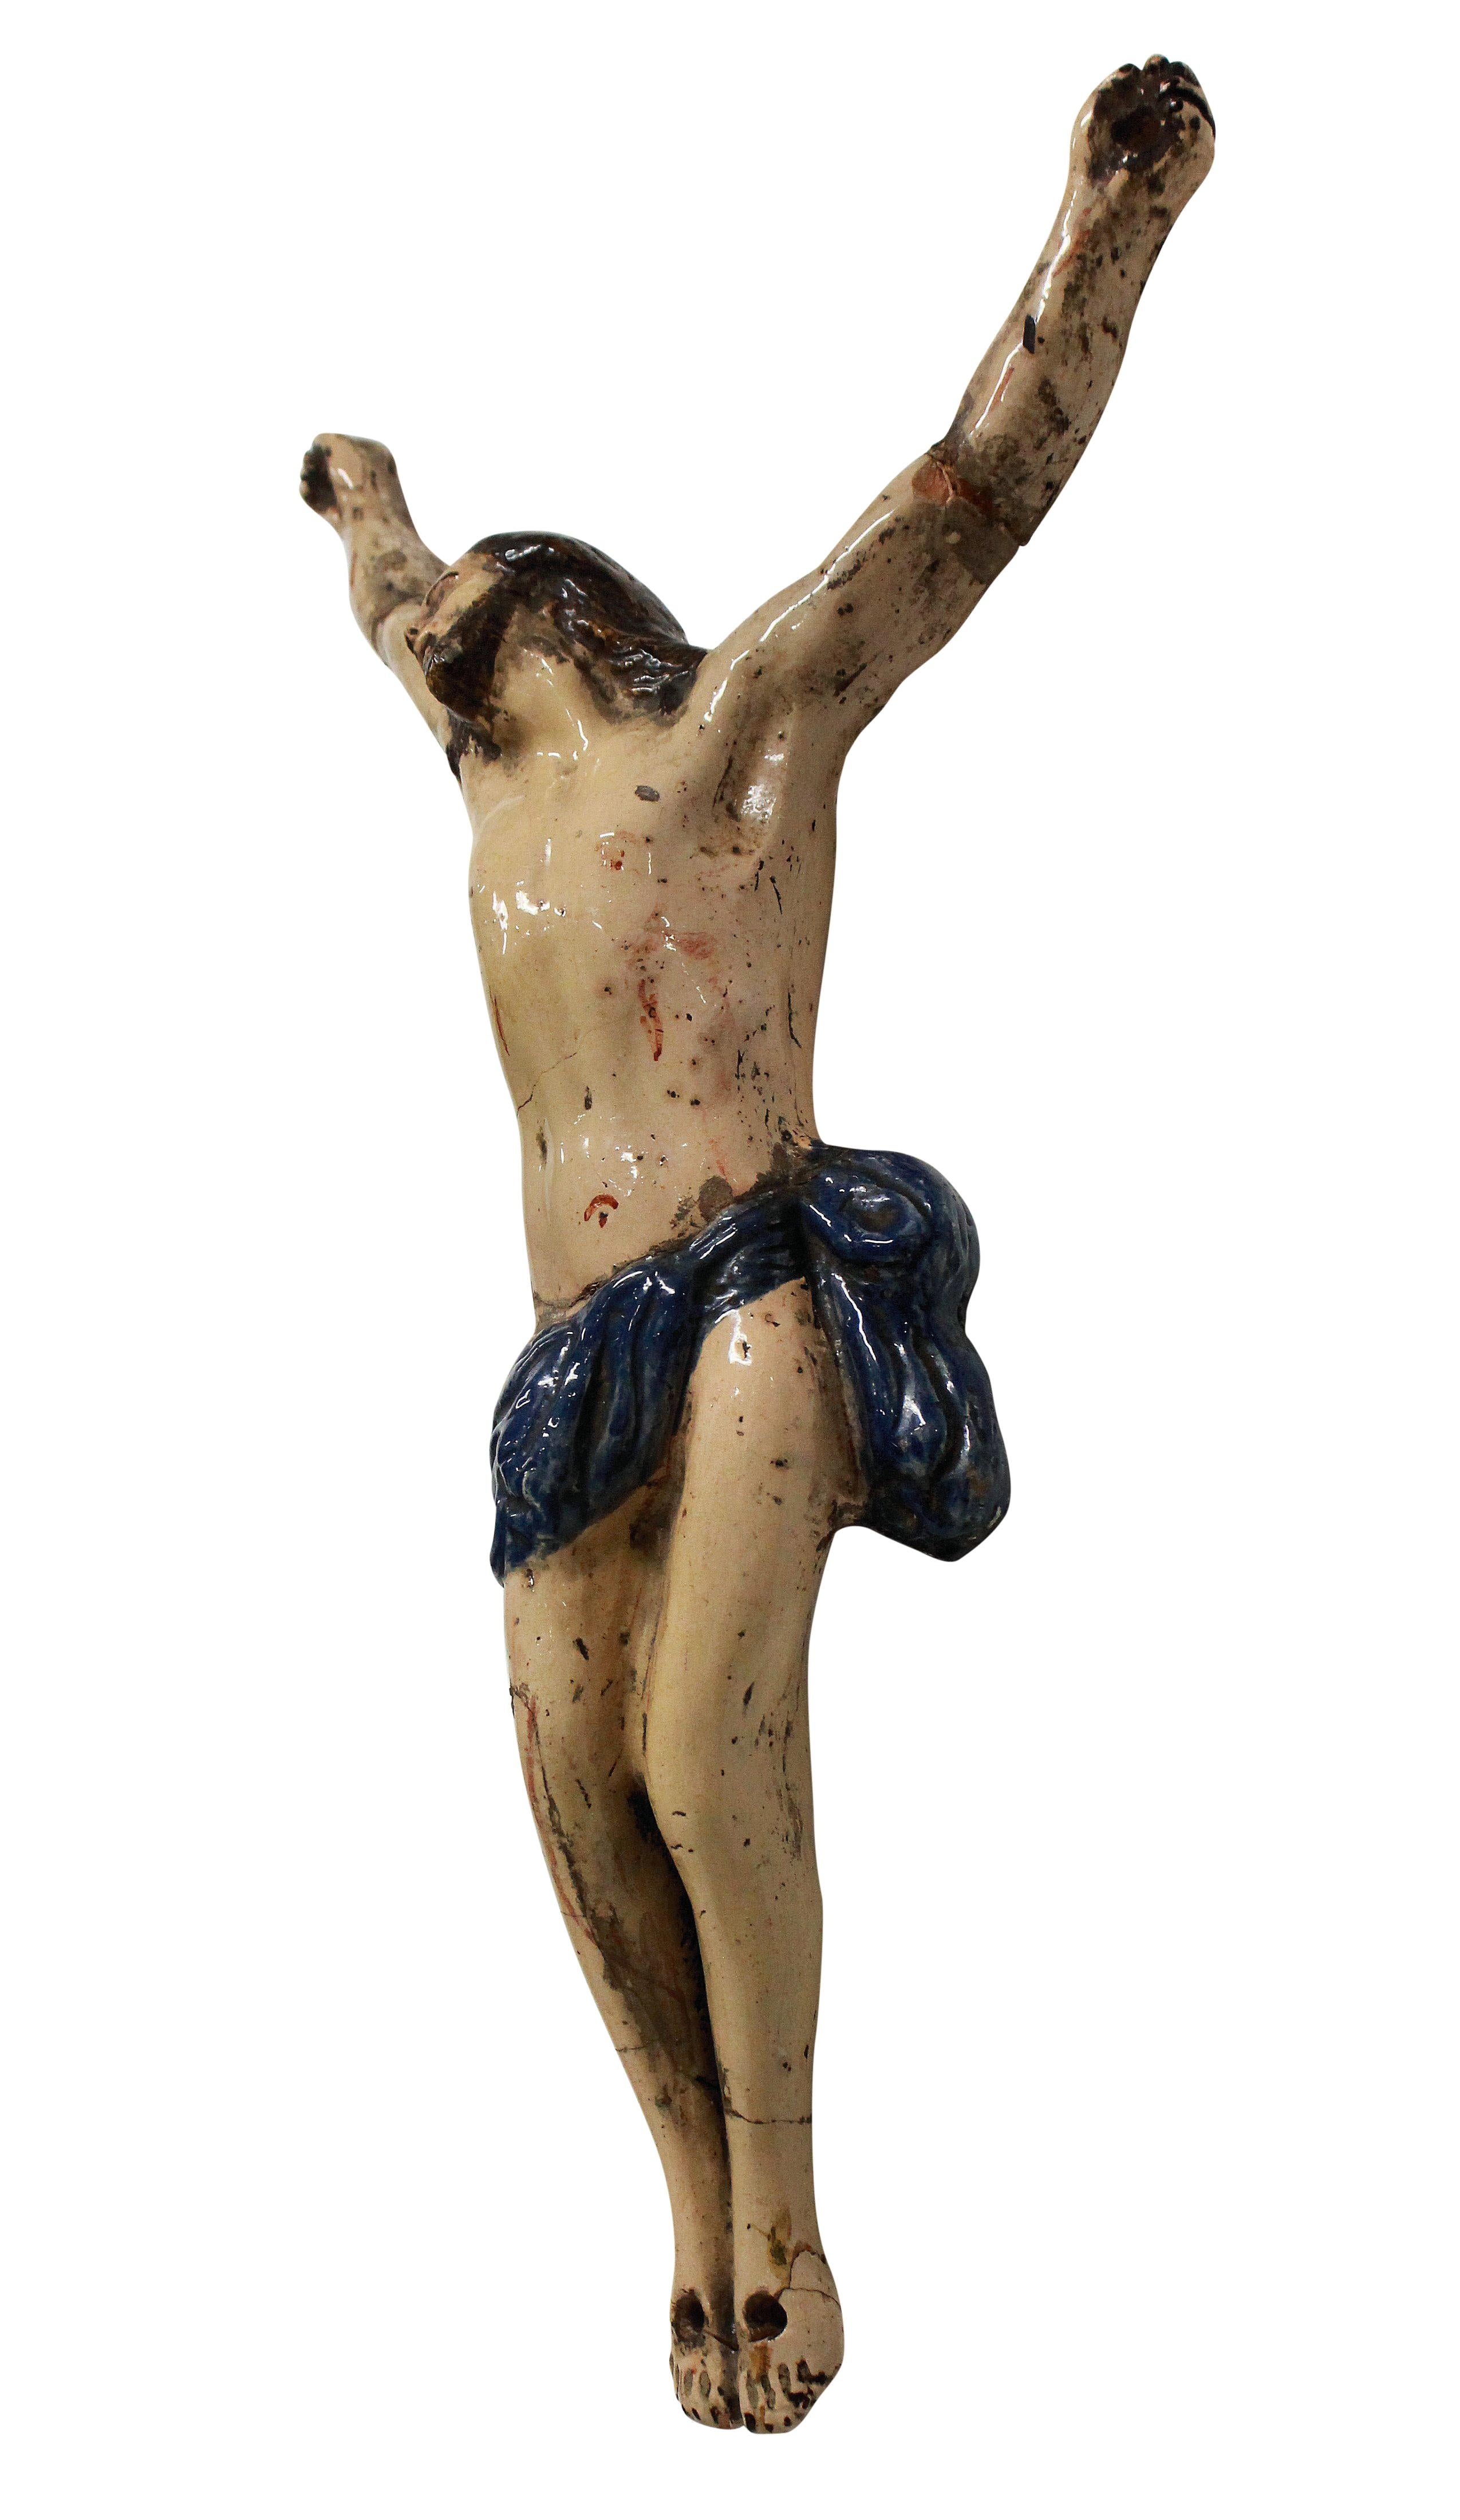 A French faience corpus manufactured in Rouen. The cross now missing and with historic damage to the wrists and ankles.